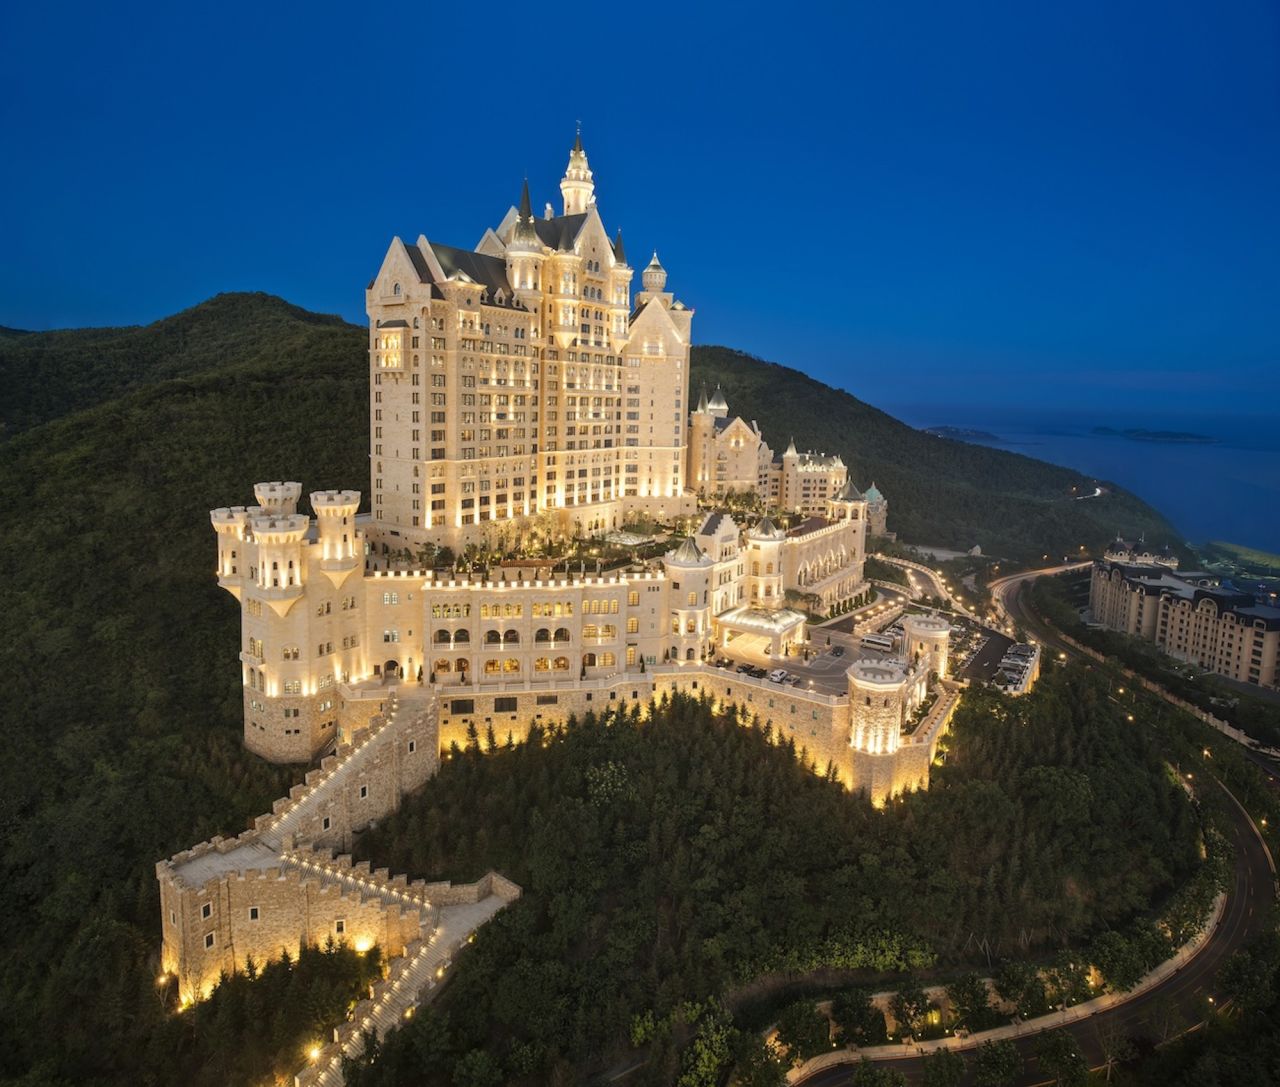 The Castle Hotel is a 15-minute drive from the bustling Chinese port city of Dalian and offers great views of the Yellow Sea.